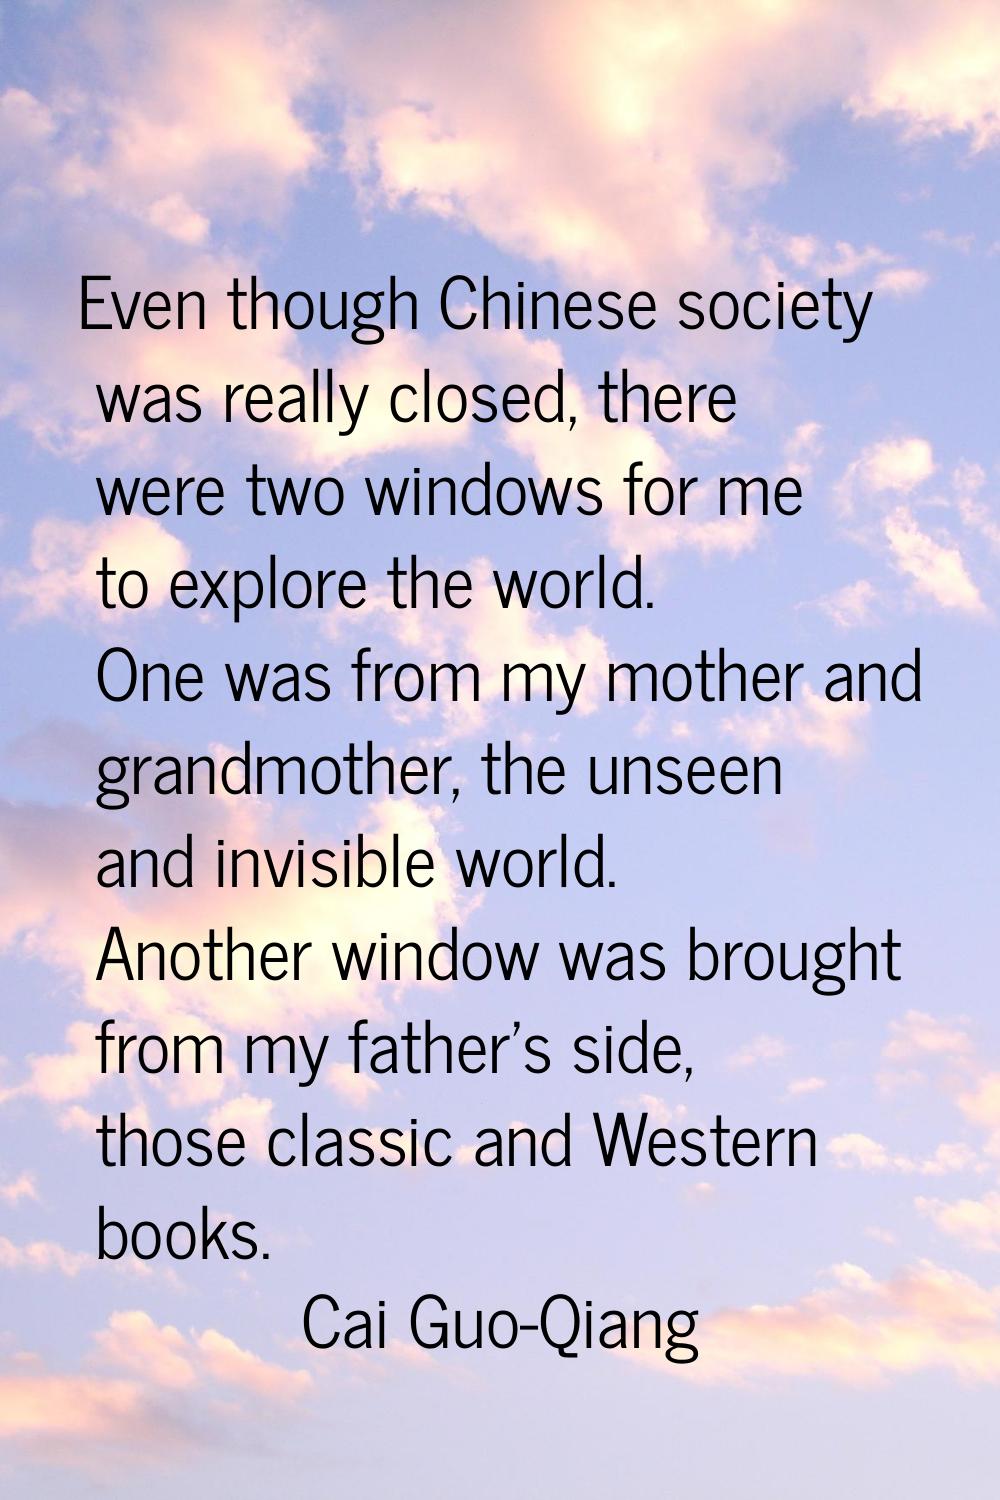 Even though Chinese society was really closed, there were two windows for me to explore the world. 